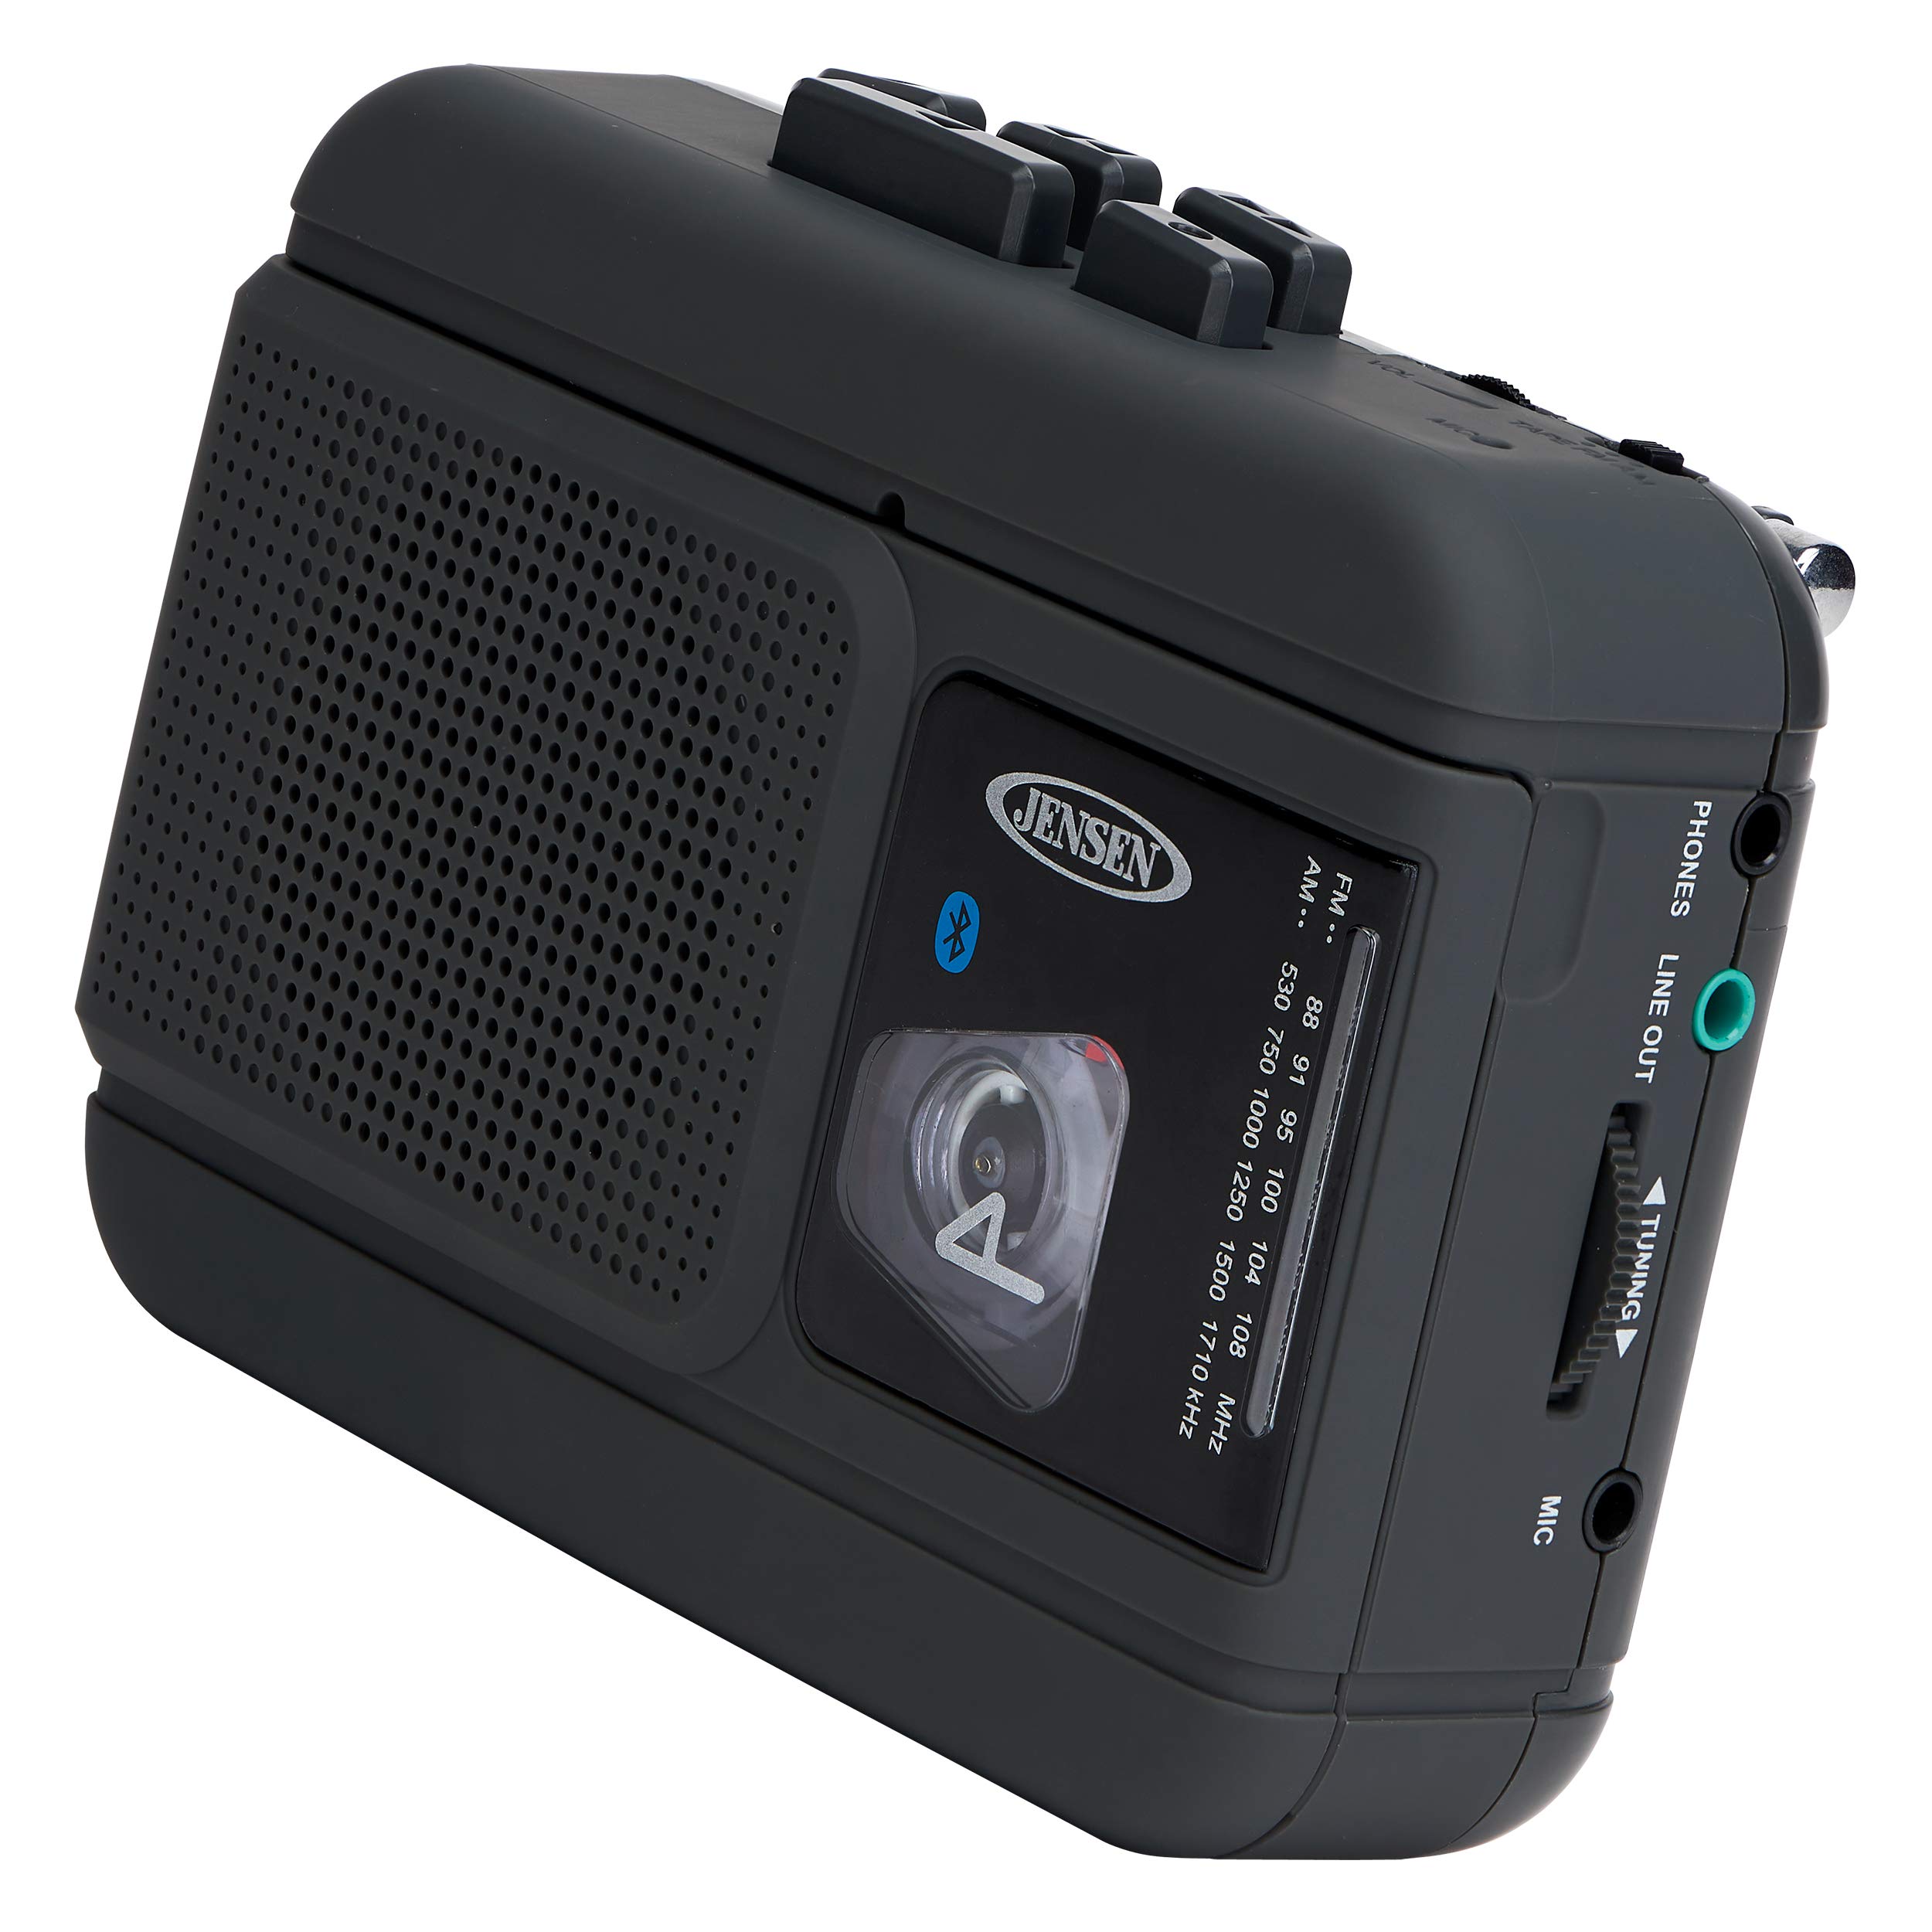 JENSEN MCR-60 MCR-60 Portable Personal Cassette Player/Recorder with AM/FM Radio, Bluetooth, and Earbuds, Black